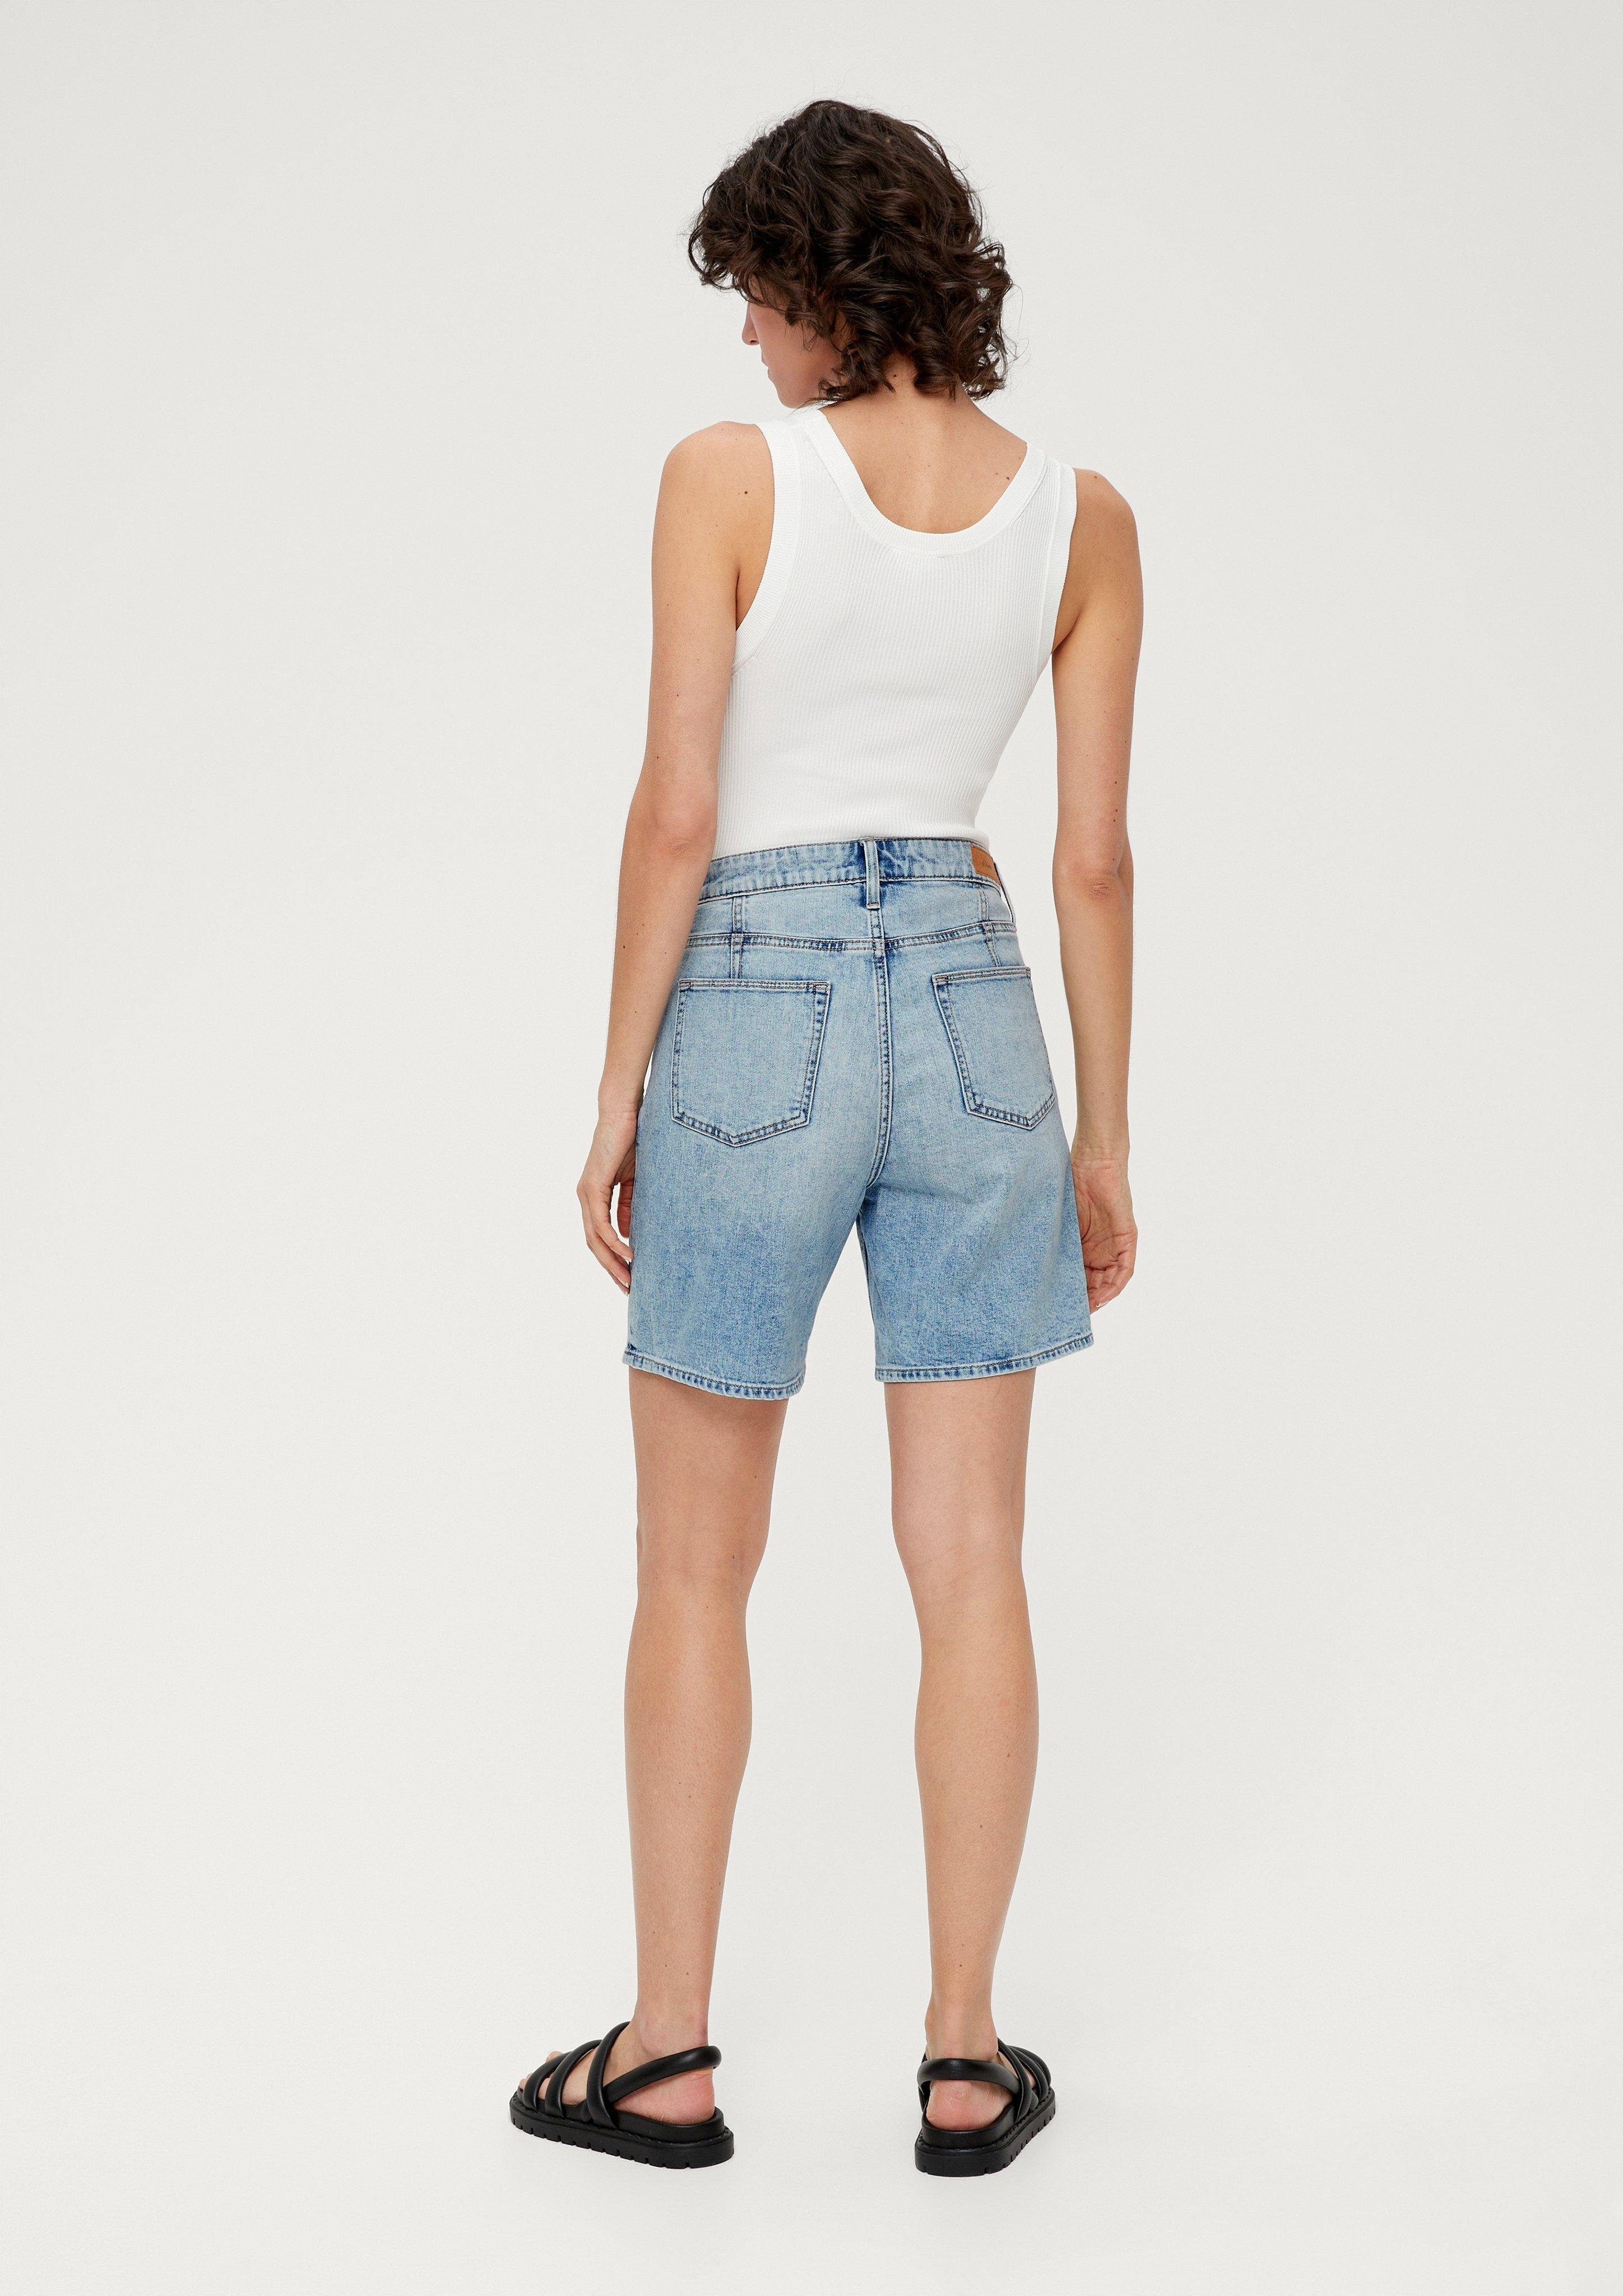 s.Oliver Jeansshorts Jeans-Shorts / Label-Patch / Fit Leg hellblau Waschung, Relaxed Mid / Rise Straight